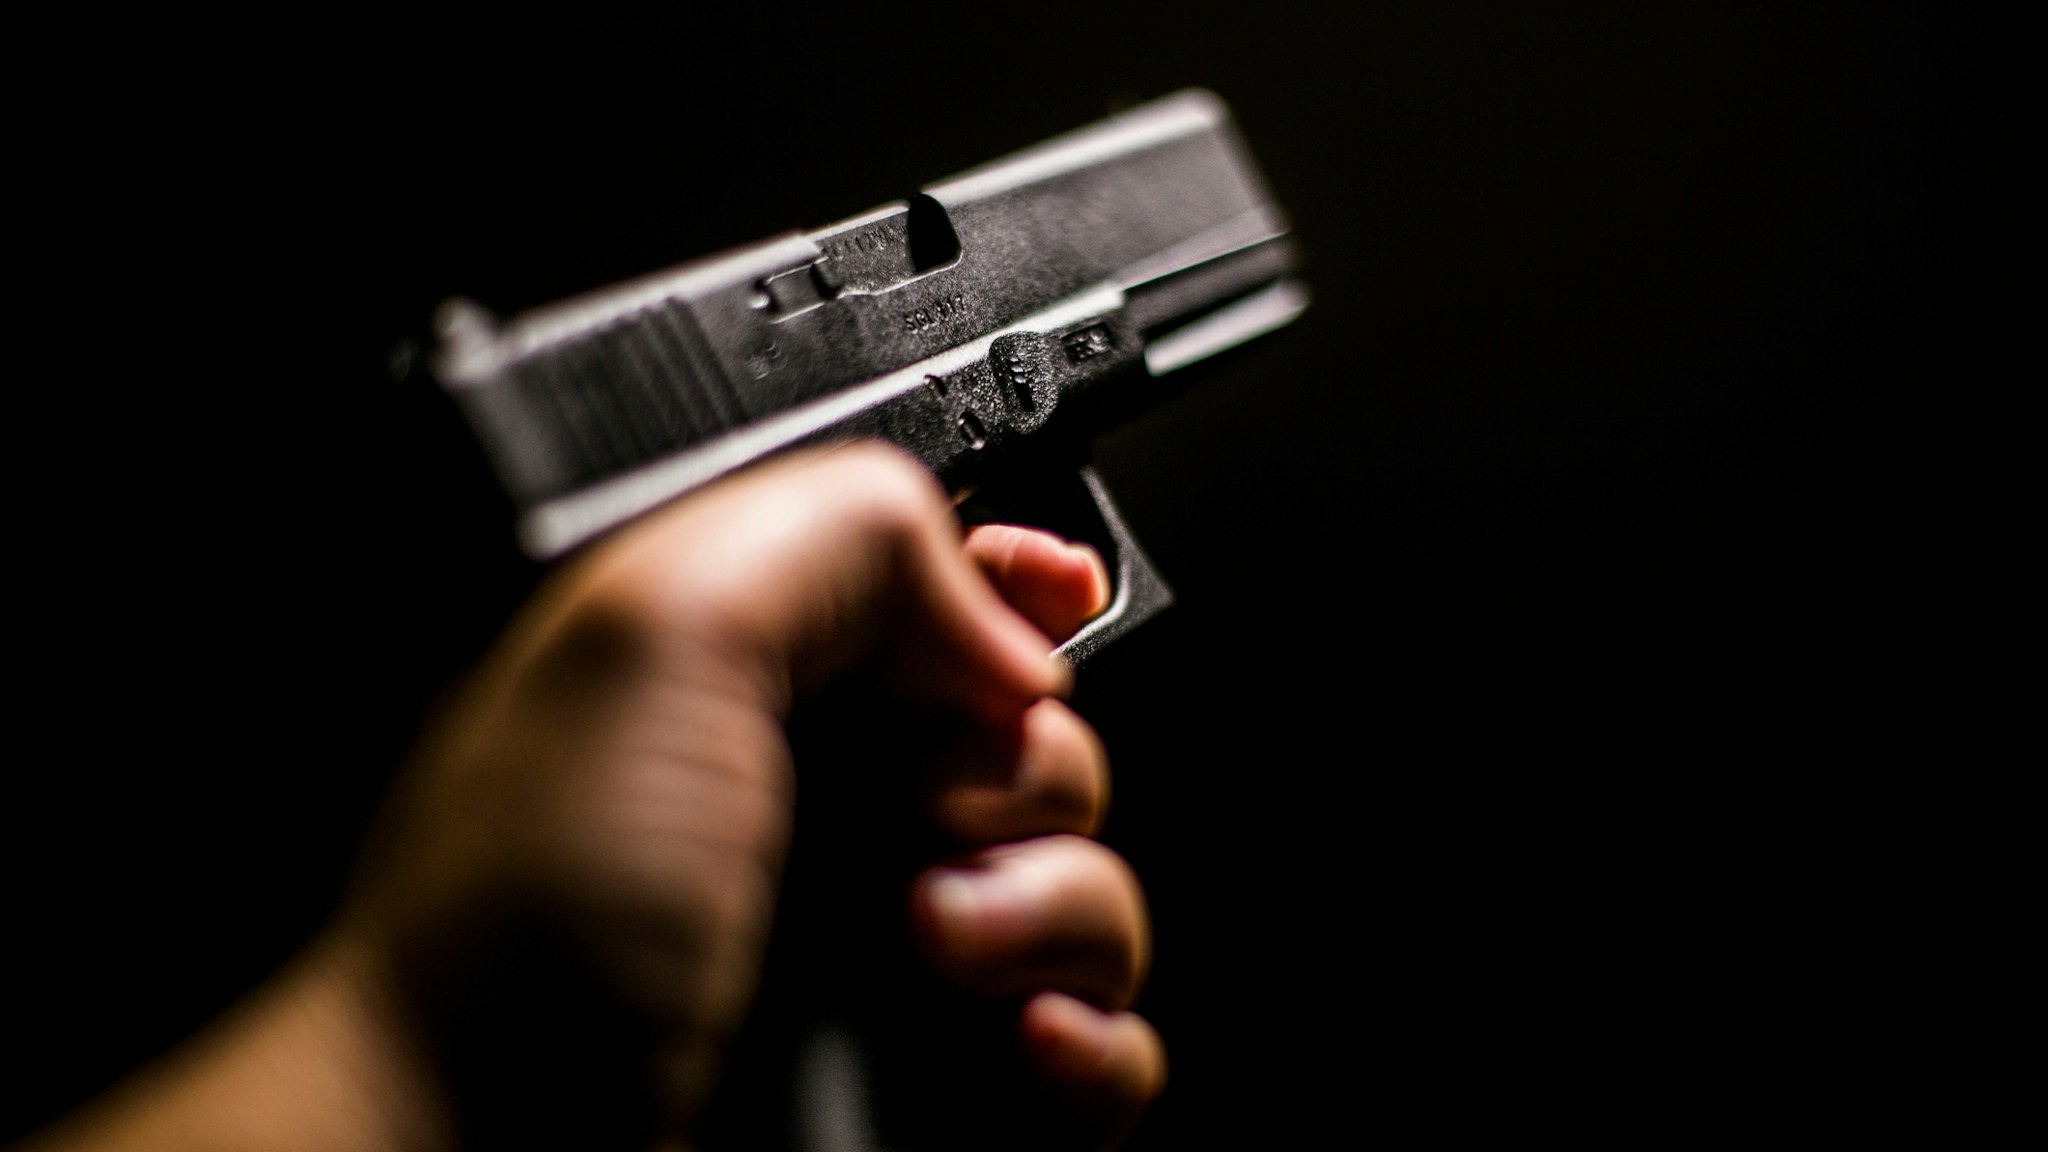 Cropped Hand Holding Gun Against Black Background - stock photo